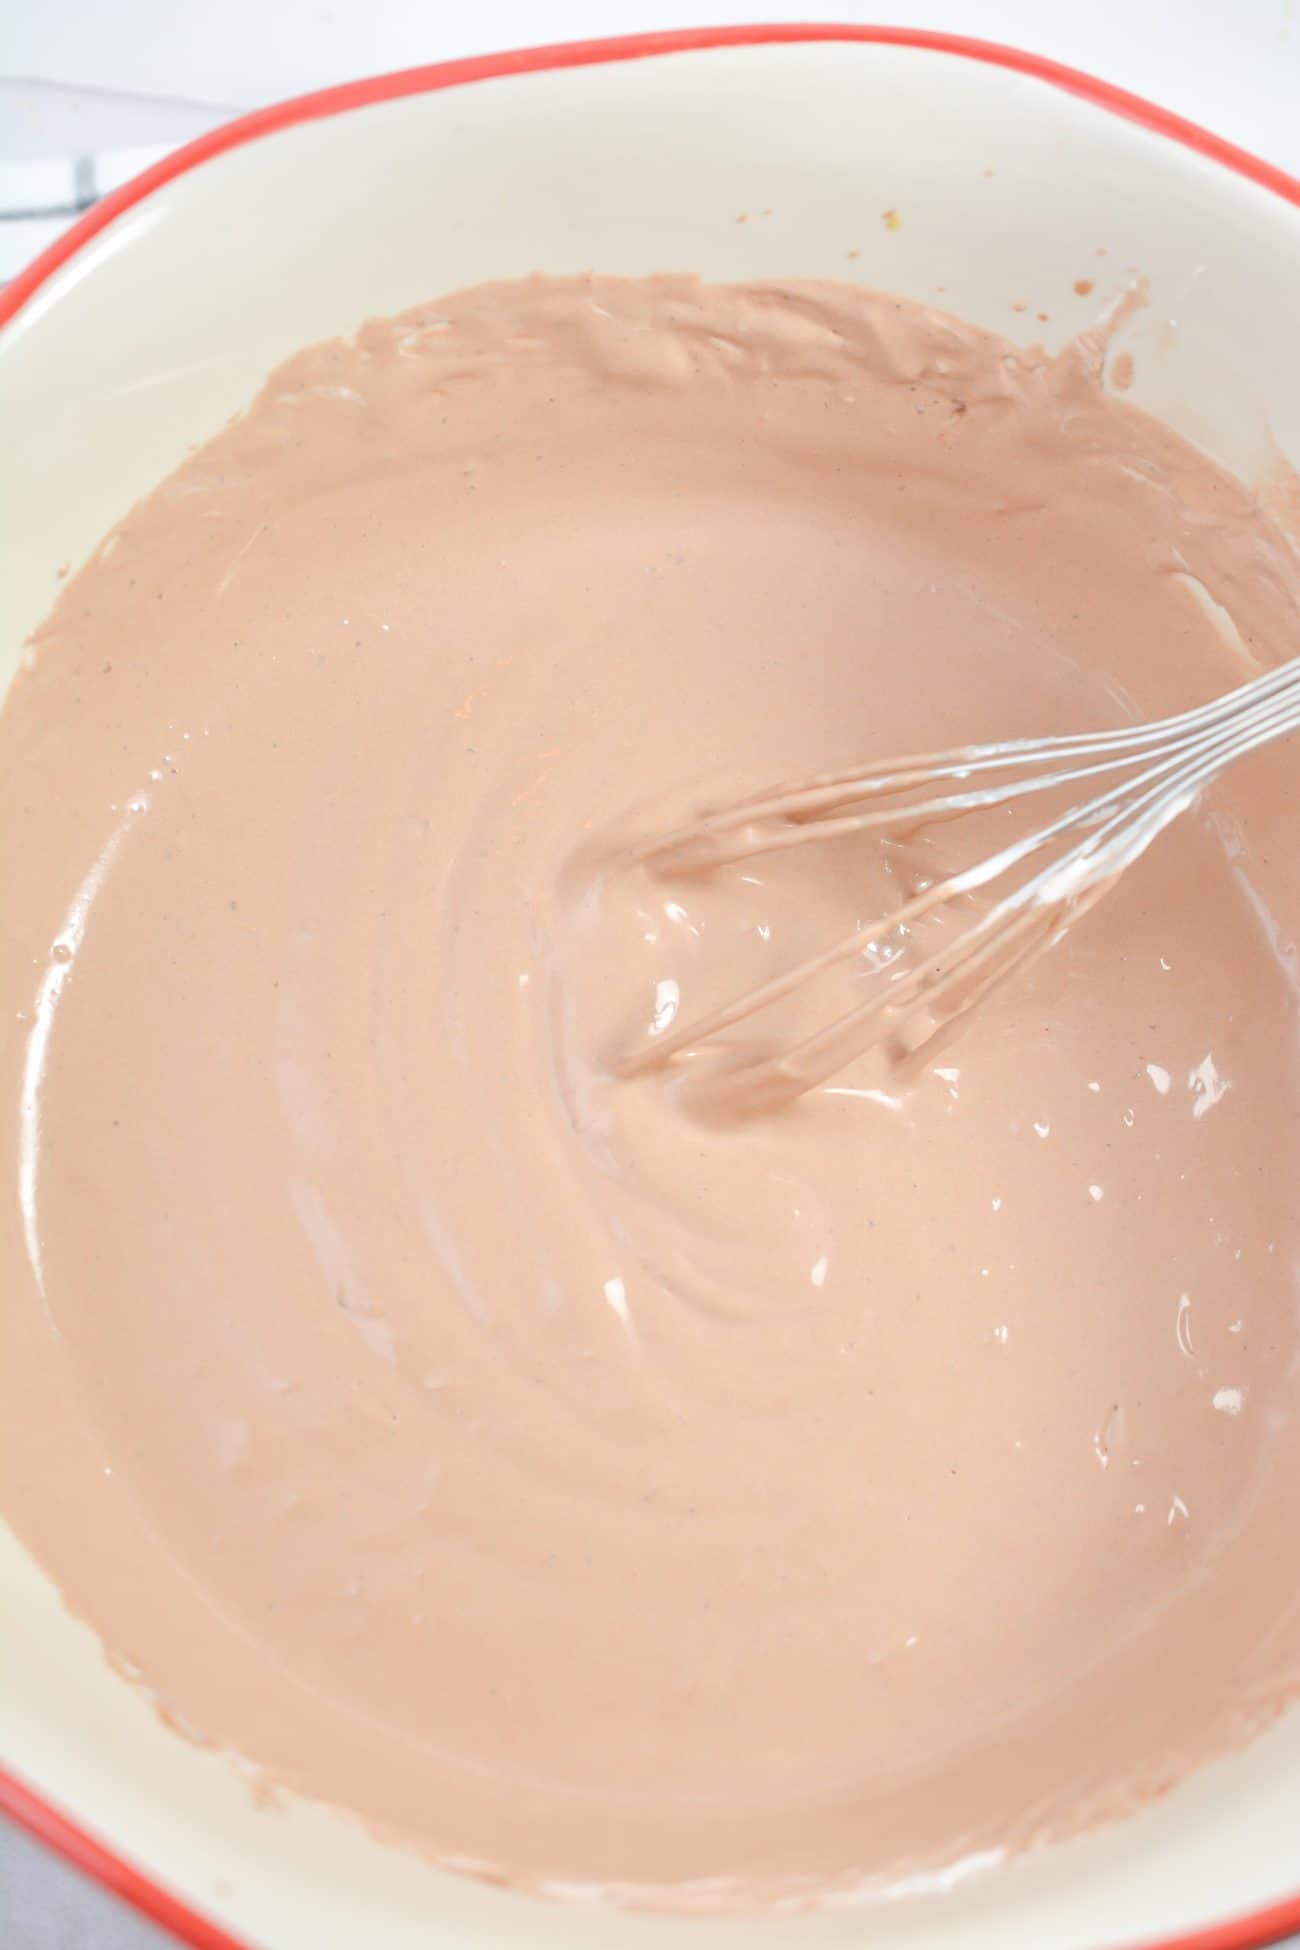 Whisk until smooth and let sit for 10 minutes.